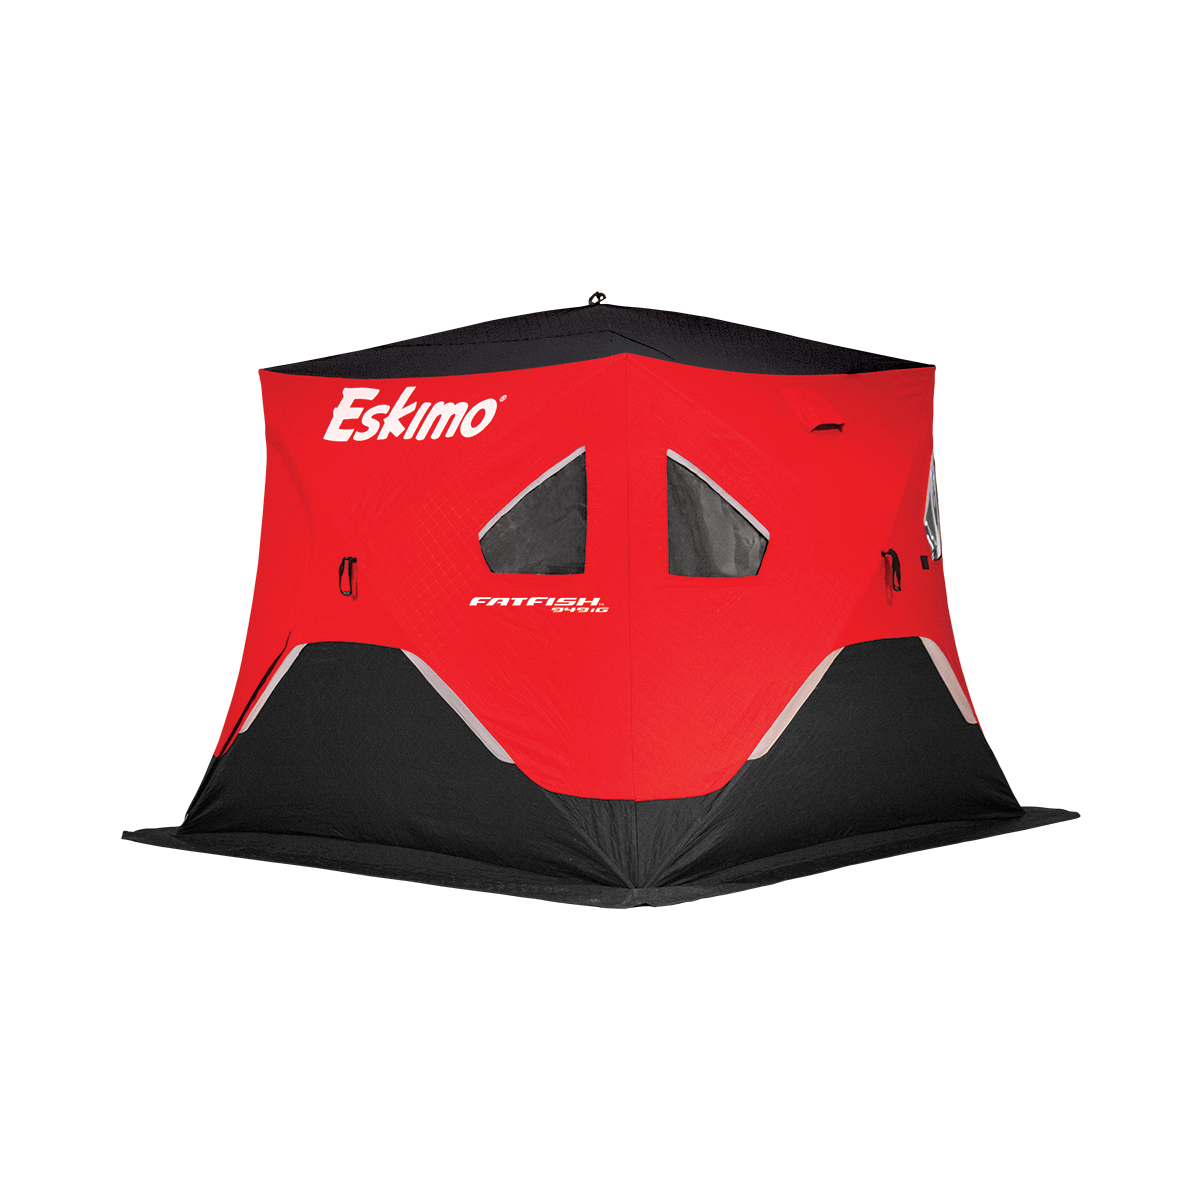 Eskimo FF949iG FatFish Pop-up Portable Hub-Style Ice Shelter, Wide Bottom  Design 61 sq ft. Fishable Area, 3-4 Person Insulated Gray Interior, Red, 99  inches x 99 inches, Shelters -  Canada